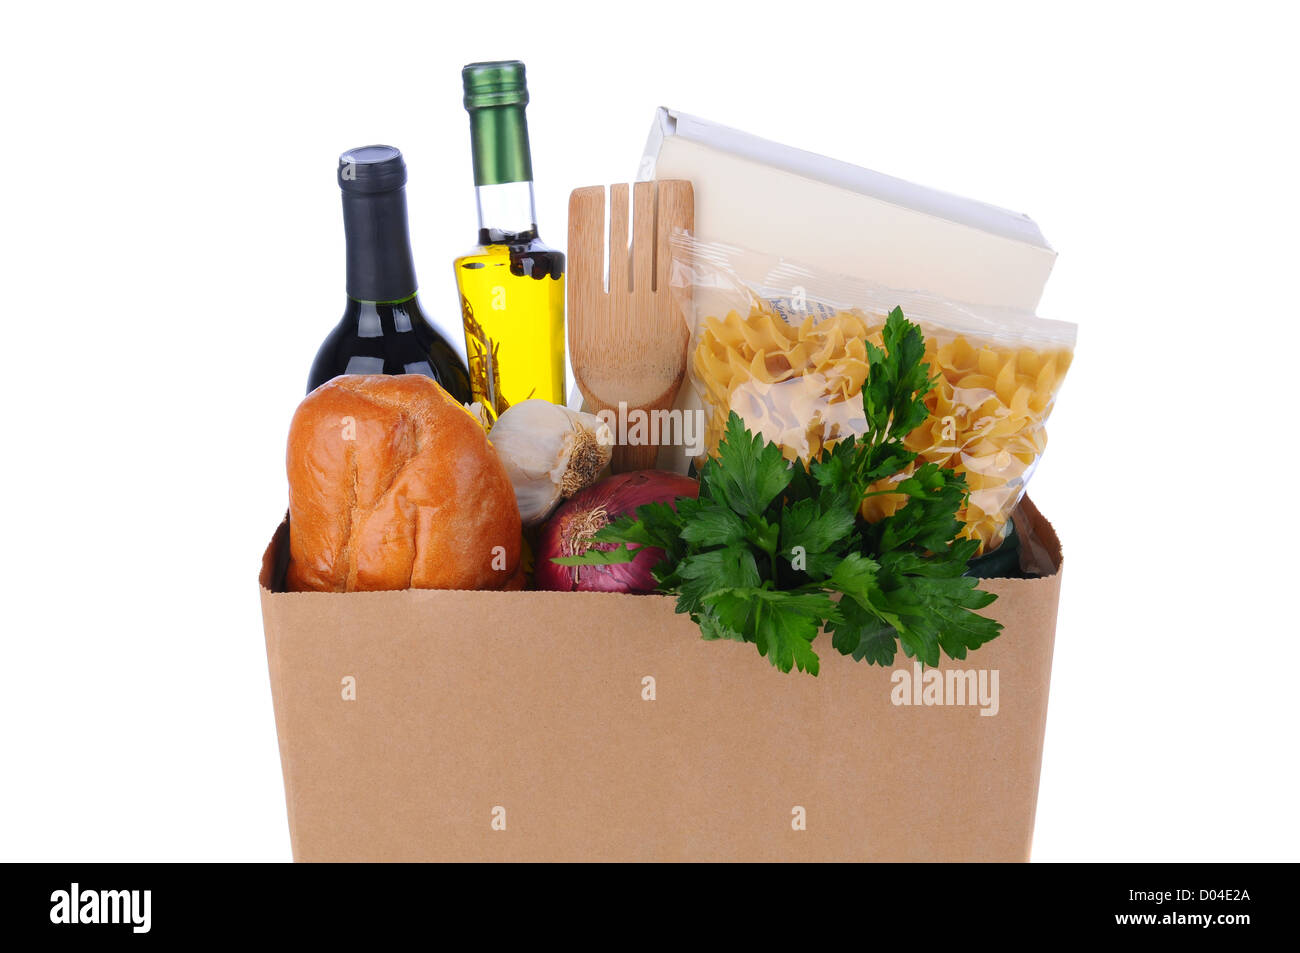 Closeup of a brown bag full of groceries over a white background. Horizontal format. Stock Photo